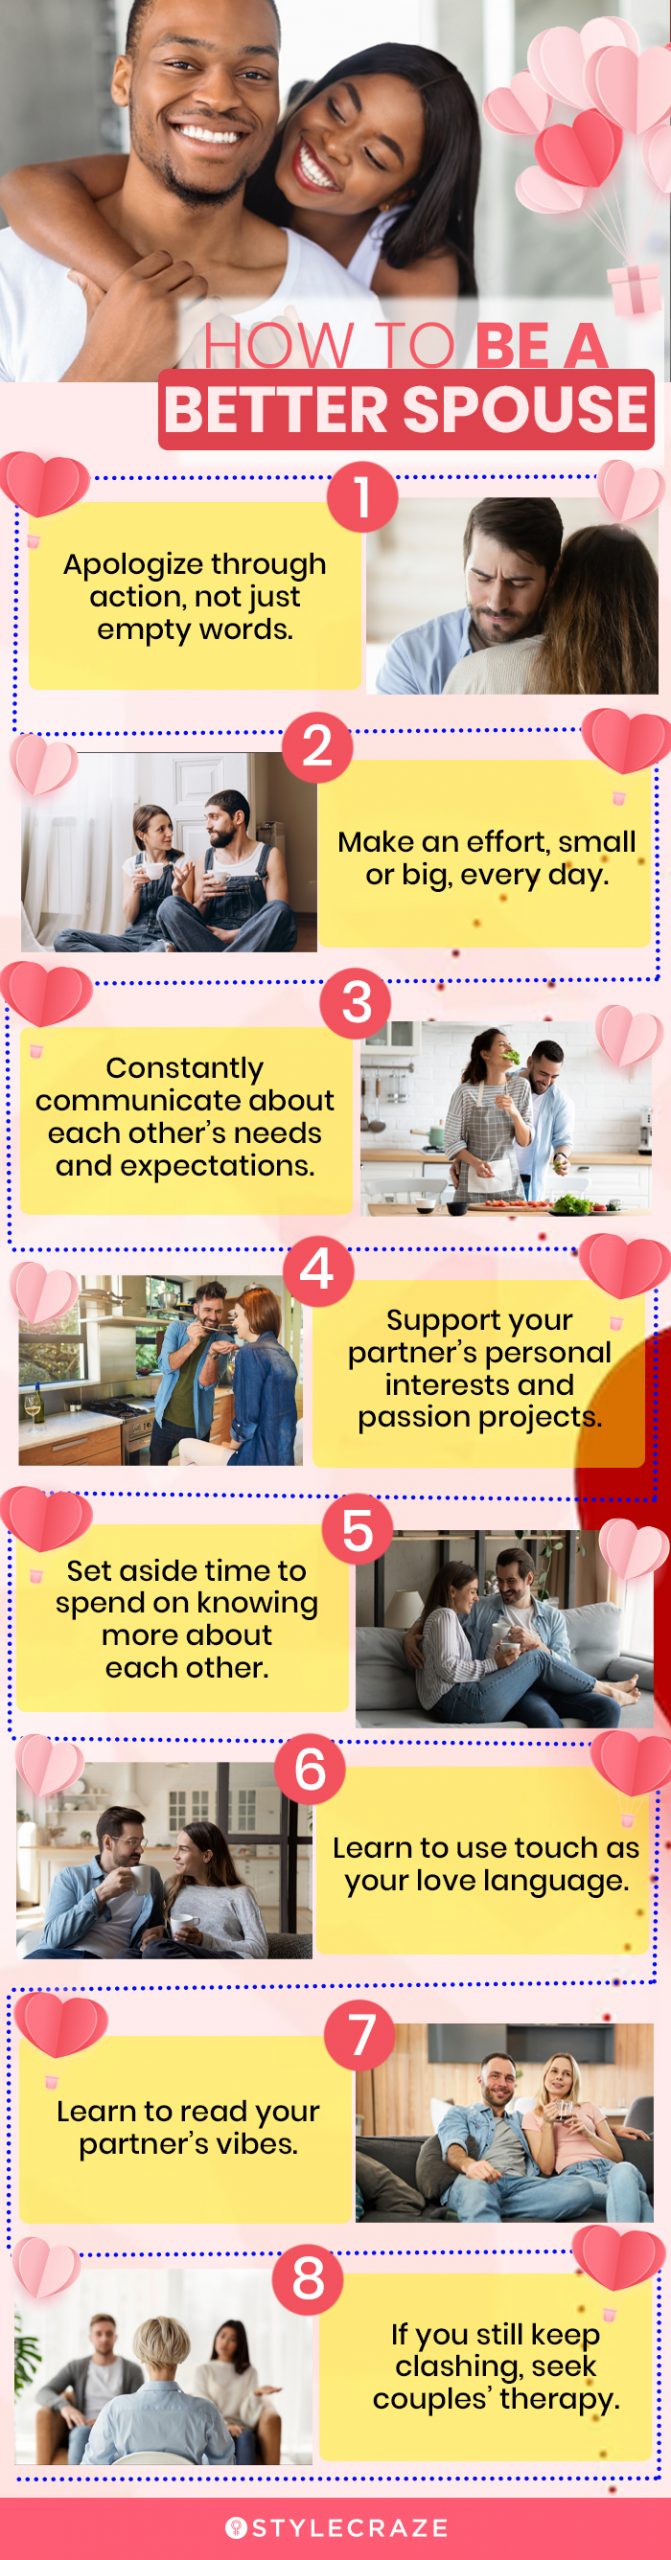 how to be a better spouse [infographic]